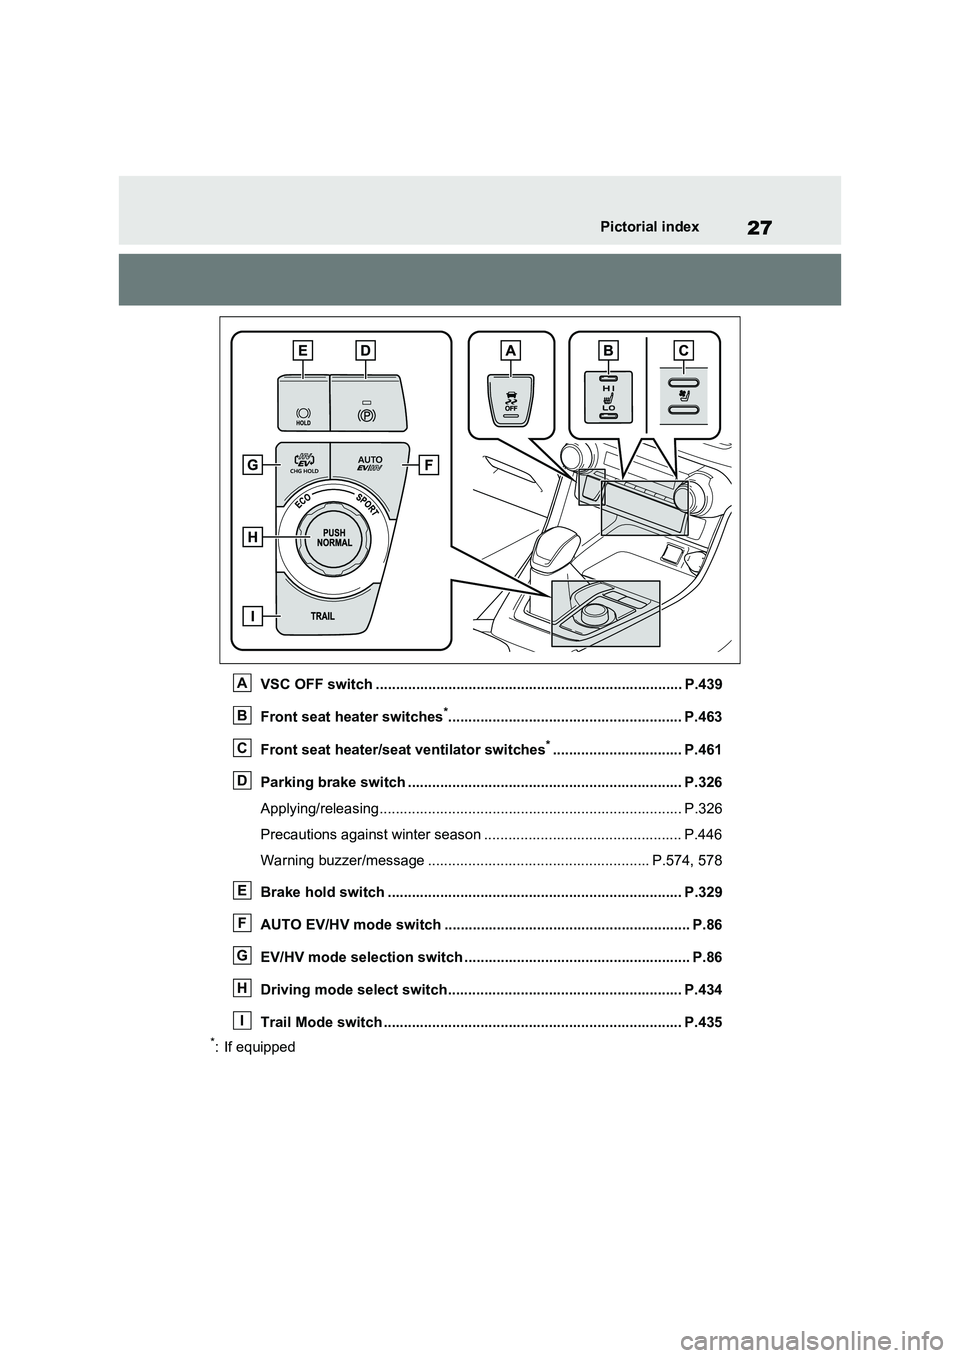 TOYOTA VERSO S 2011  Owners Manual 27Pictorial index
VSC OFF switch ............................................................................ P.439
Front seat heater switches
*........................................................